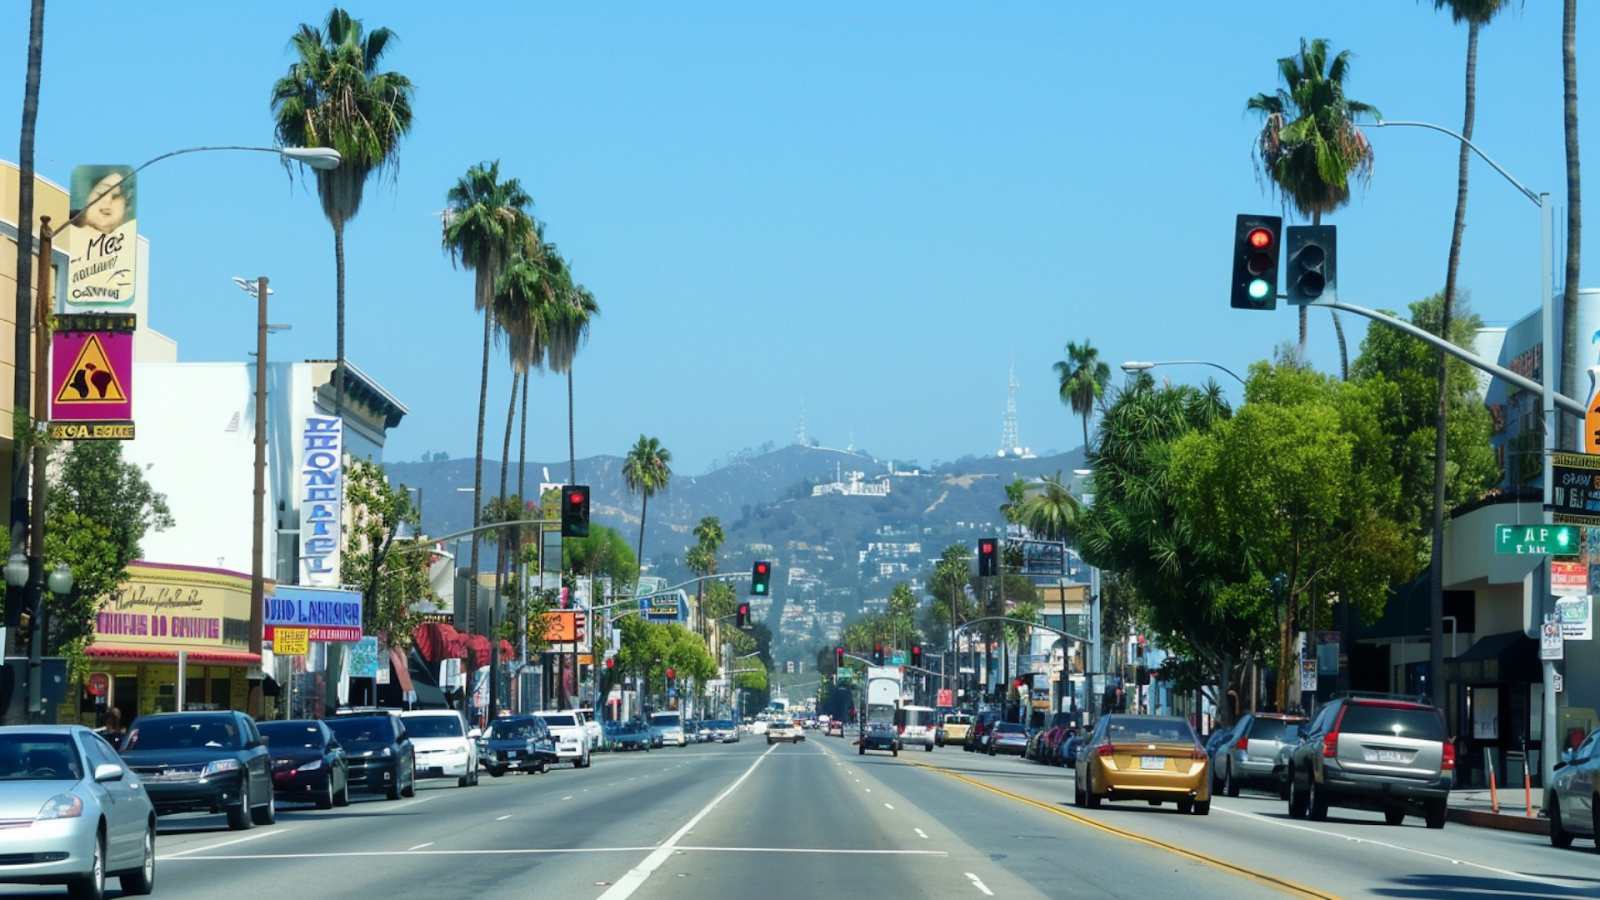 The Melrose Avenue in Los Angeles with cars parked on the side of the street